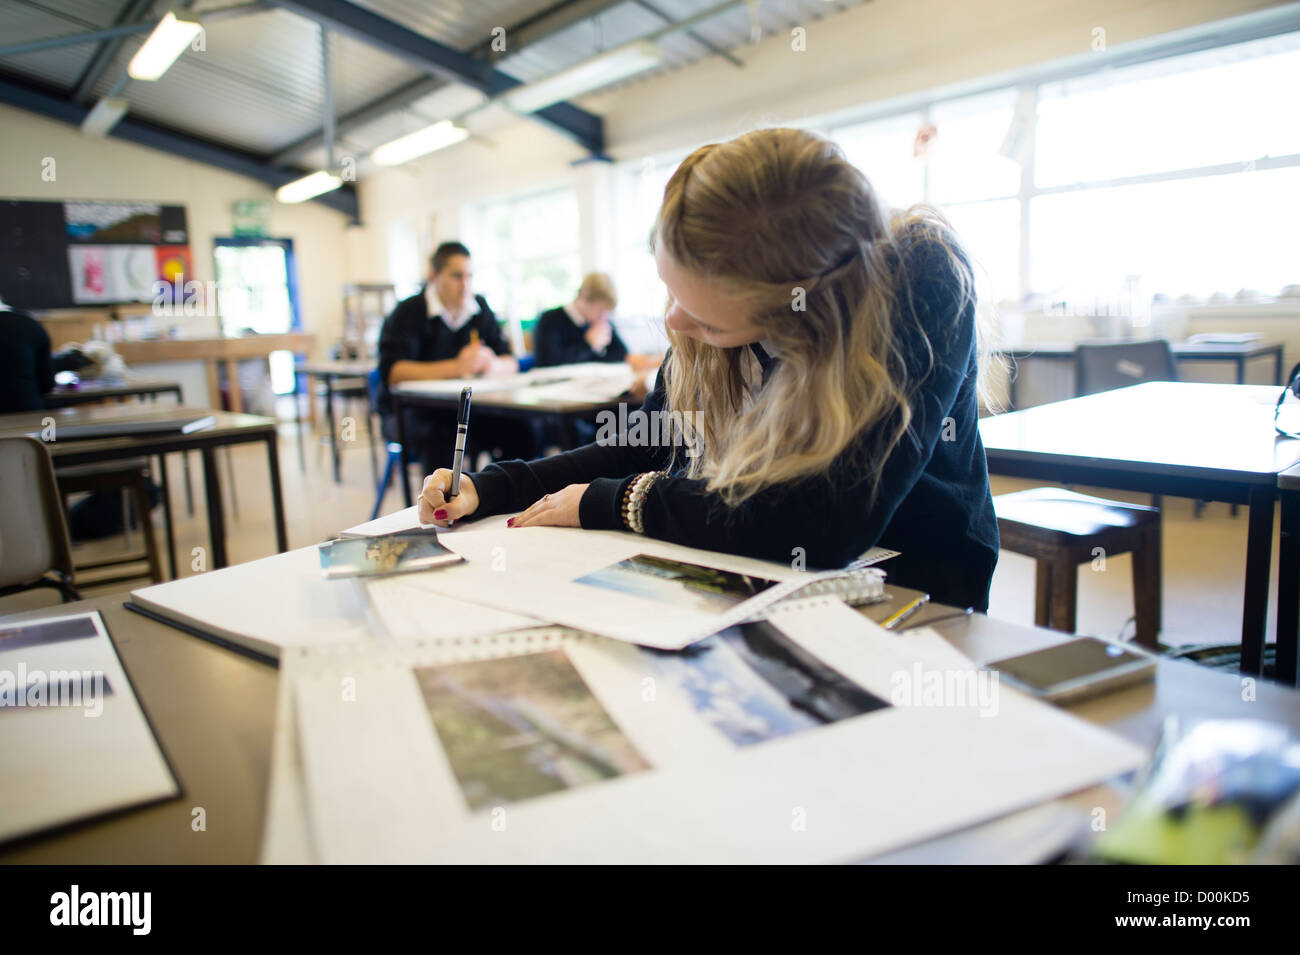 A teenage girl year 12 13 working in an  A level art lesson at a secondary comprehensive school, Wales UK Stock Photo